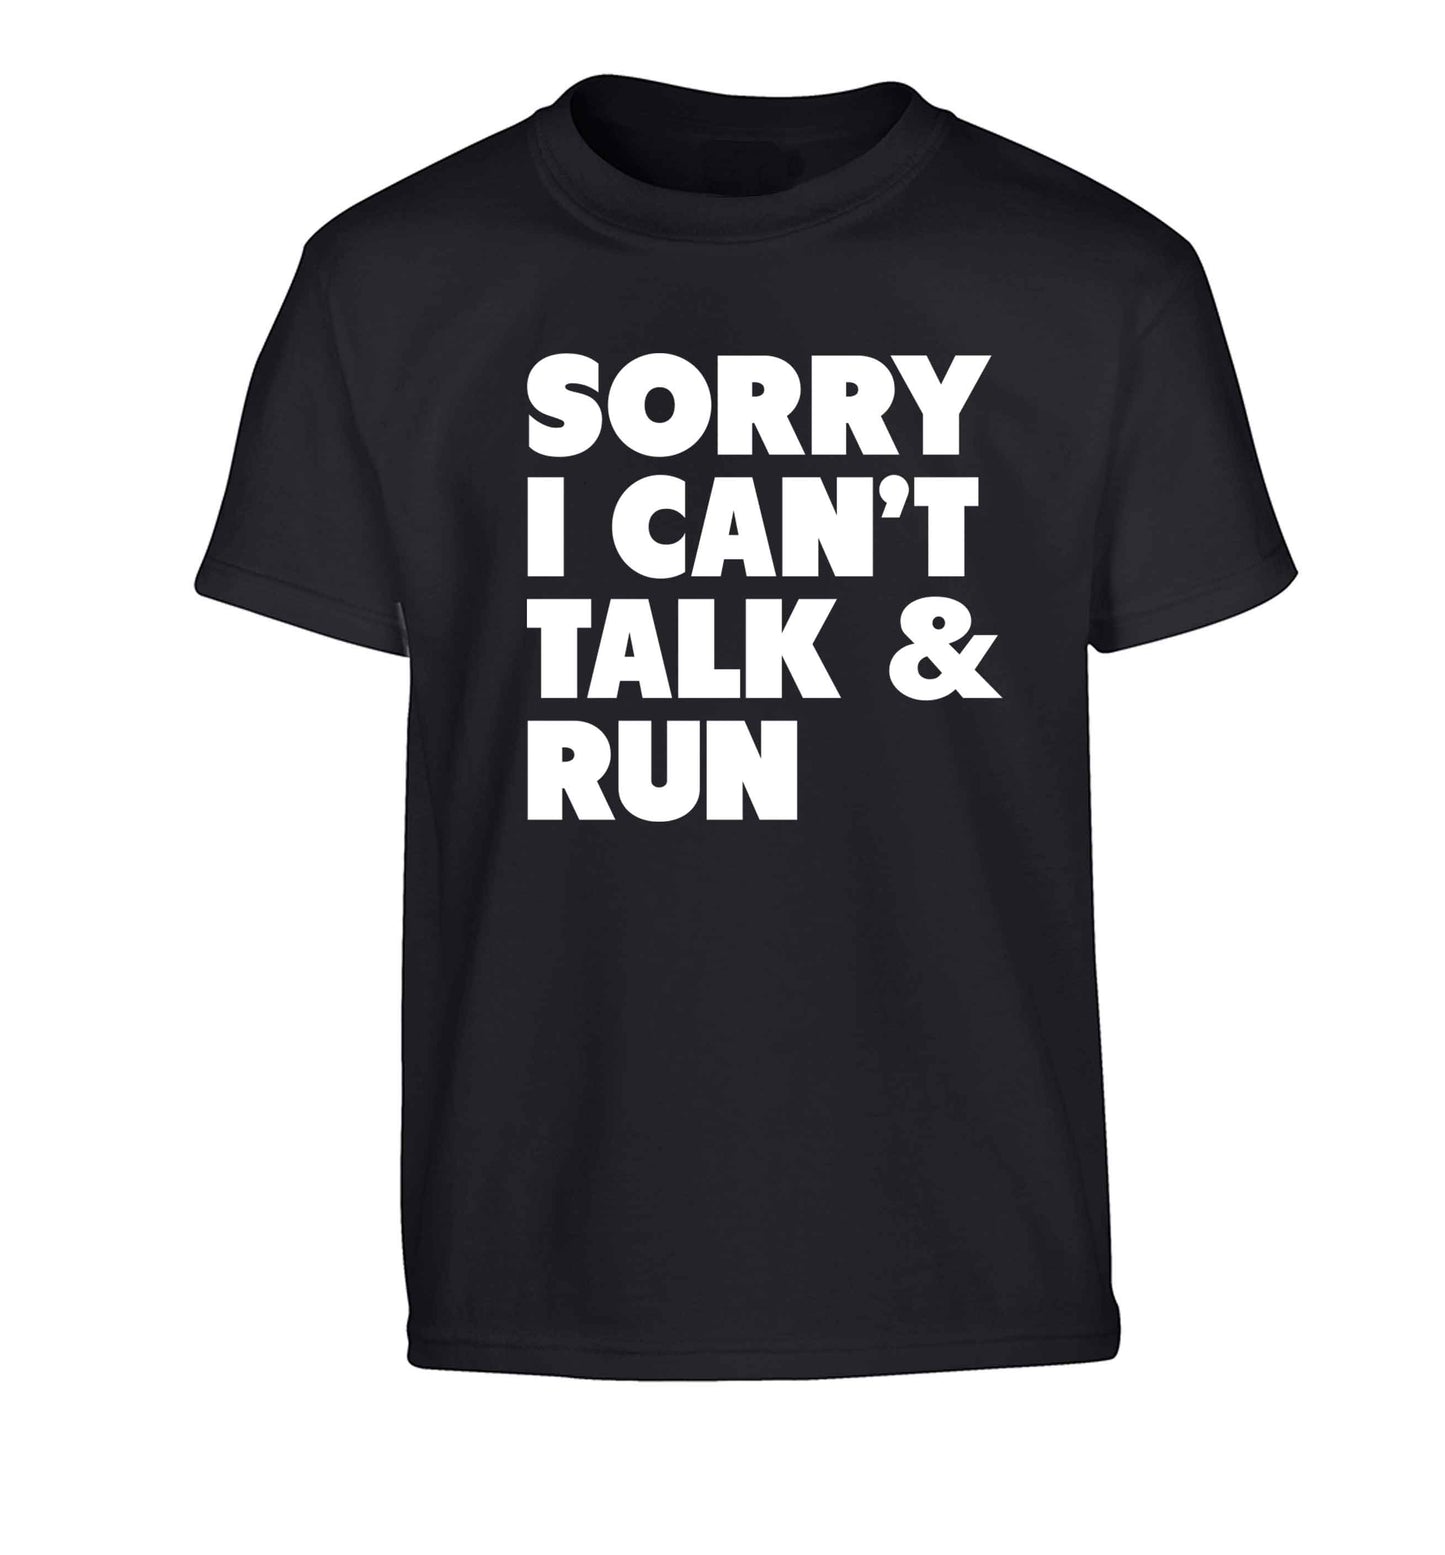 Sorry I can't talk and run Children's black Tshirt 12-13 Years